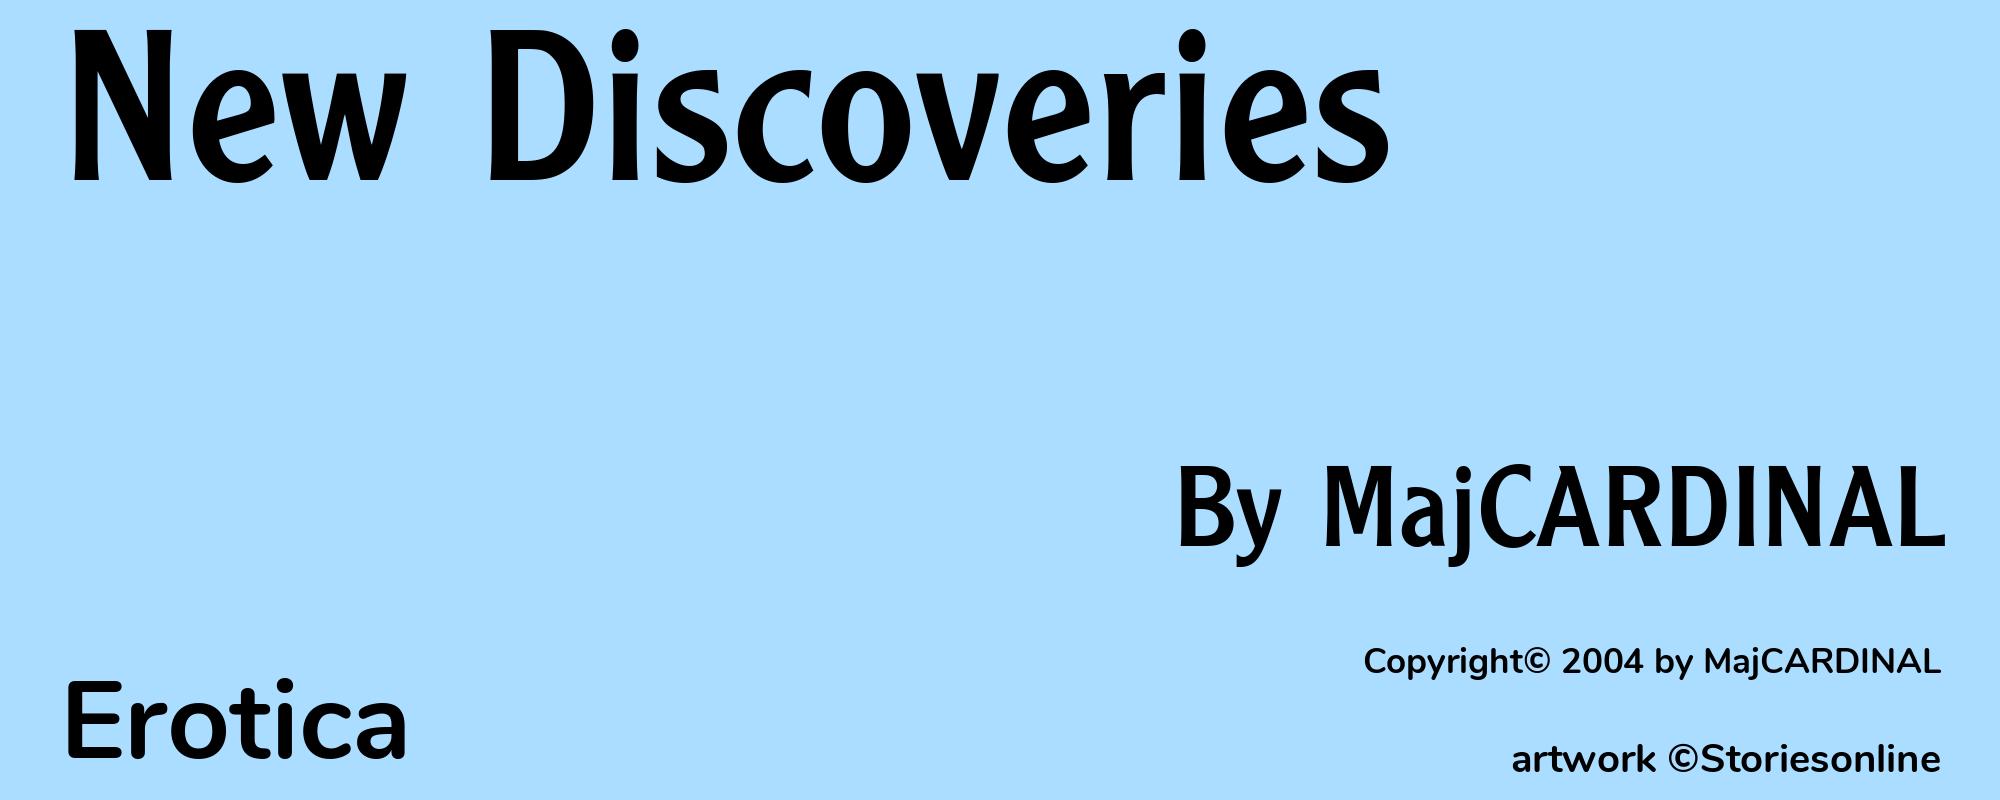 New Discoveries - Cover